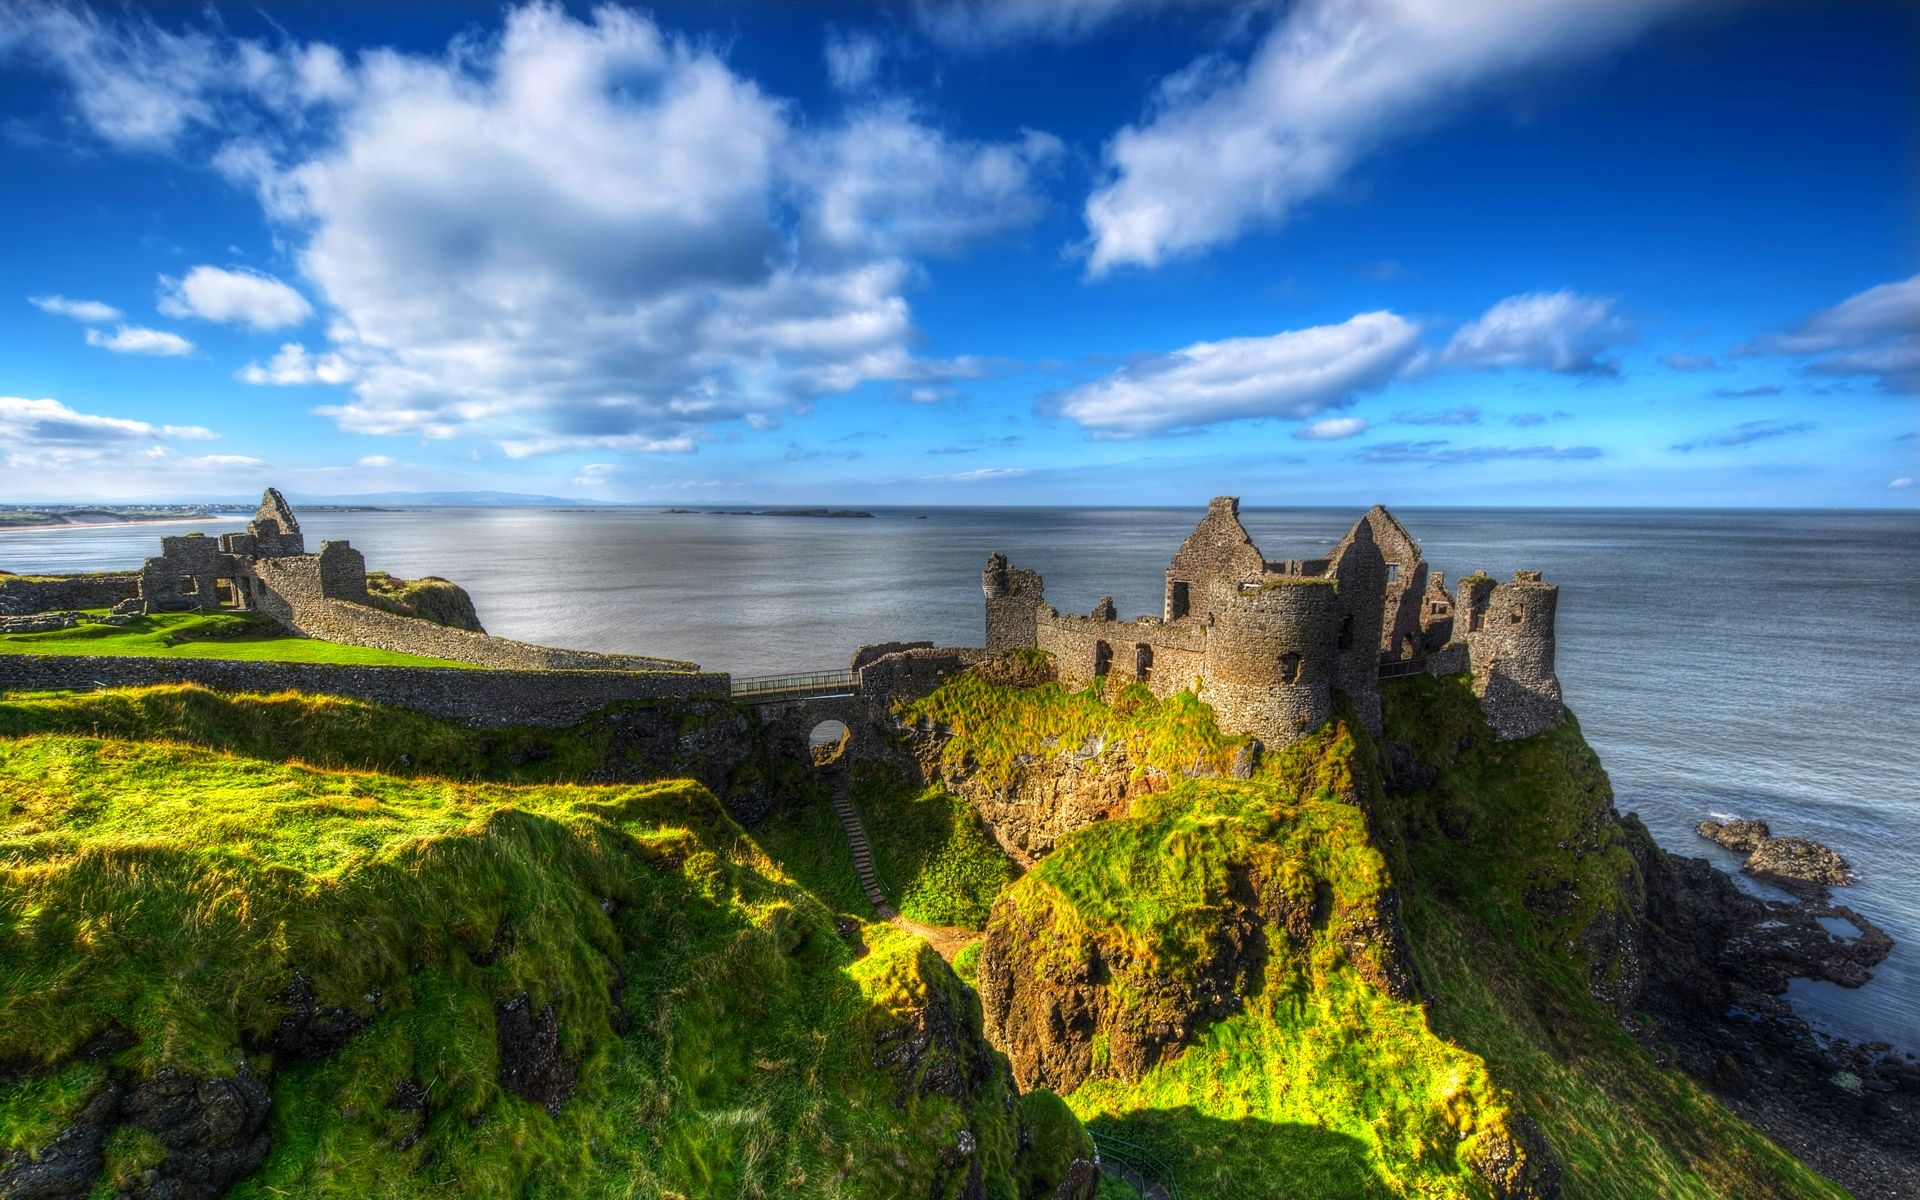 blue, grass, white, sea, green, clouds, coast, beautiful, ruined castle, medieval wallpaper